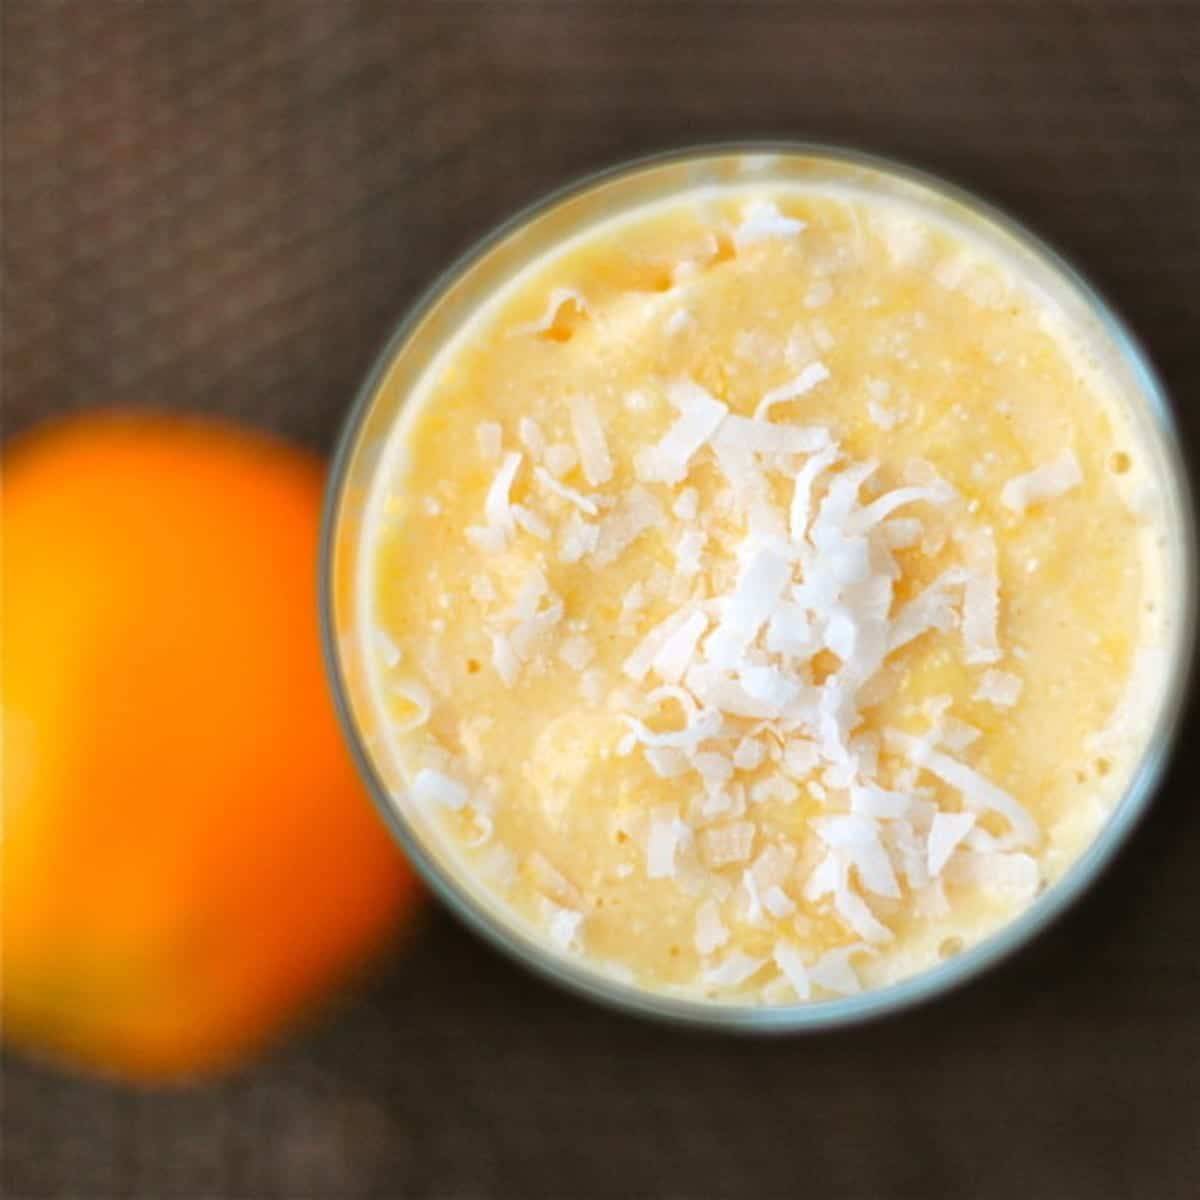 Coconut pineapple orange smoothie with coconut shreds on top.